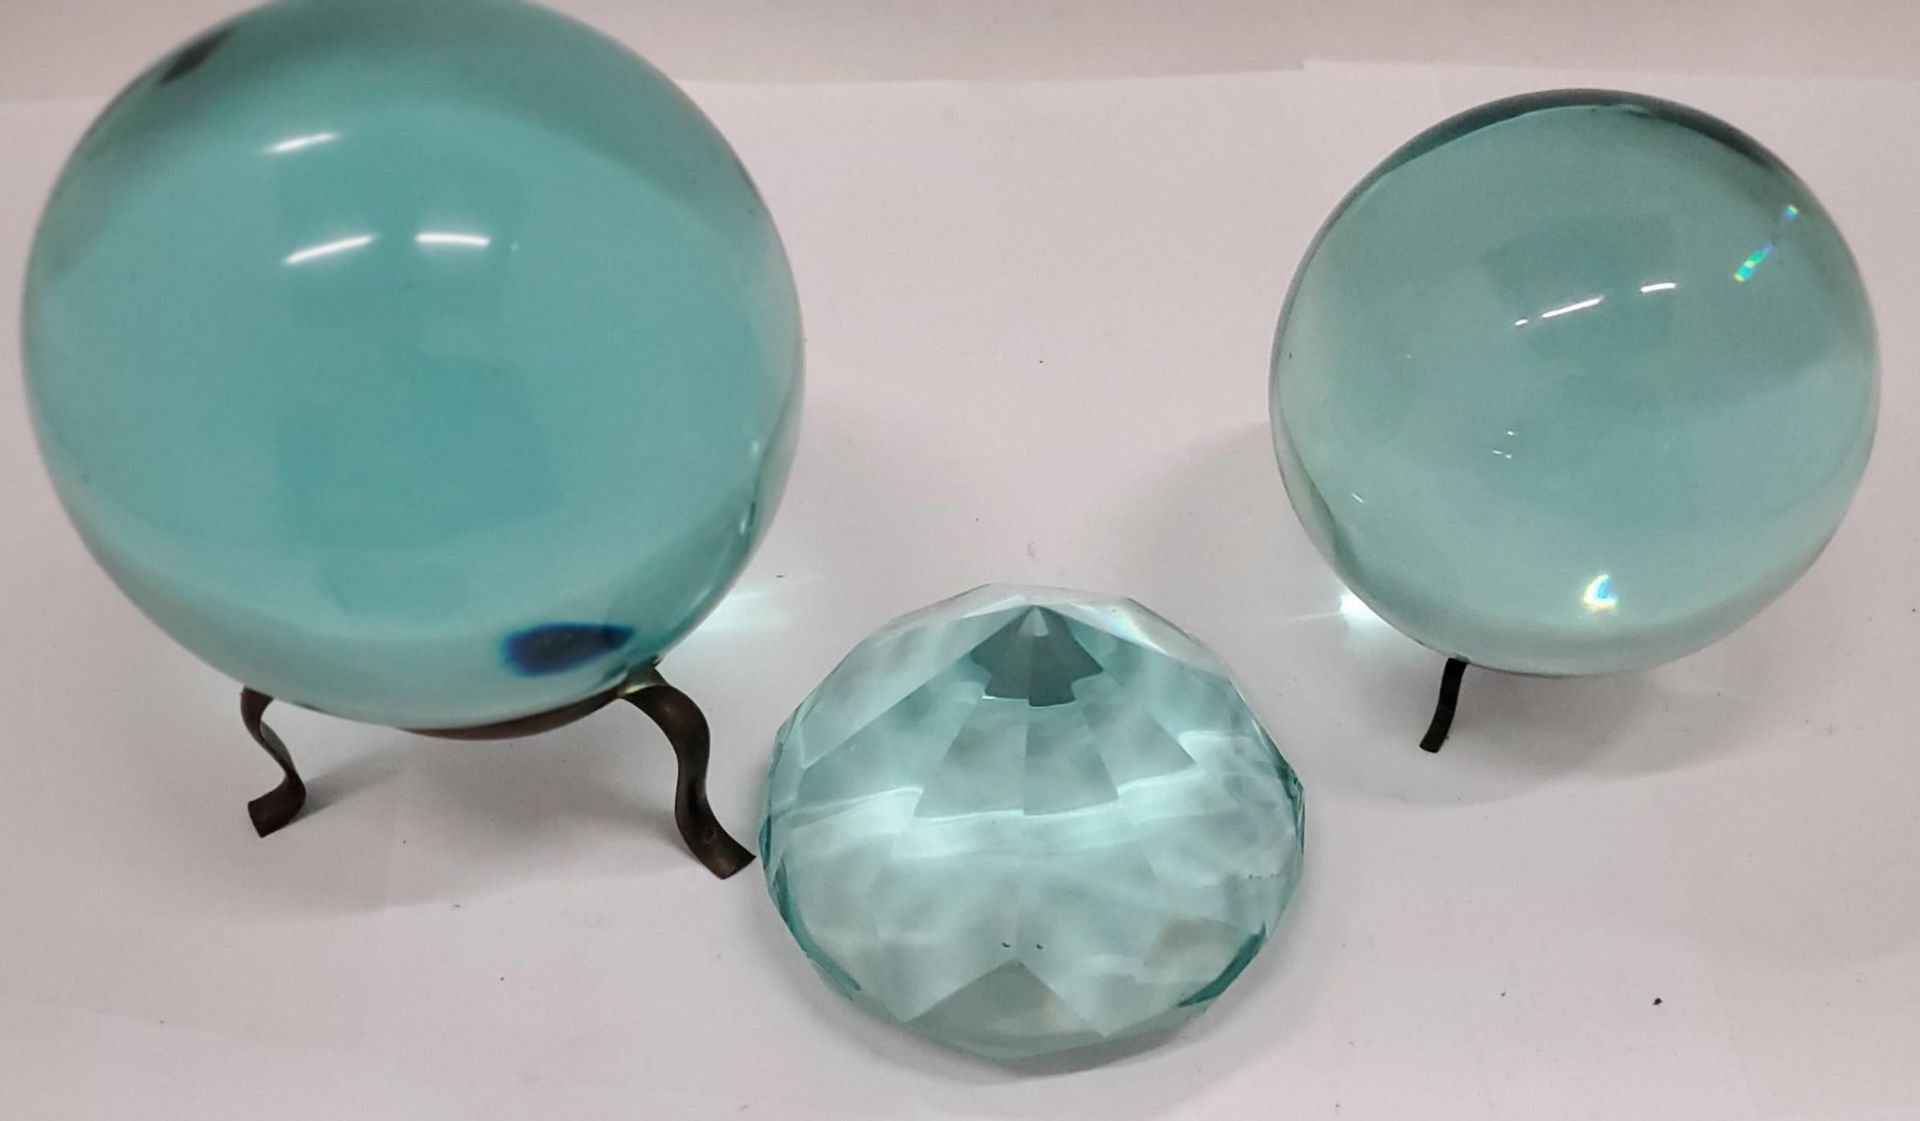 TWO TURQUOISE GLASS 'CRYSTAL BALLS' ON STANDS, A LARGE TURQUOISE CRYSTAL PLUS TWO PAPERWEIGHTS - Image 3 of 3